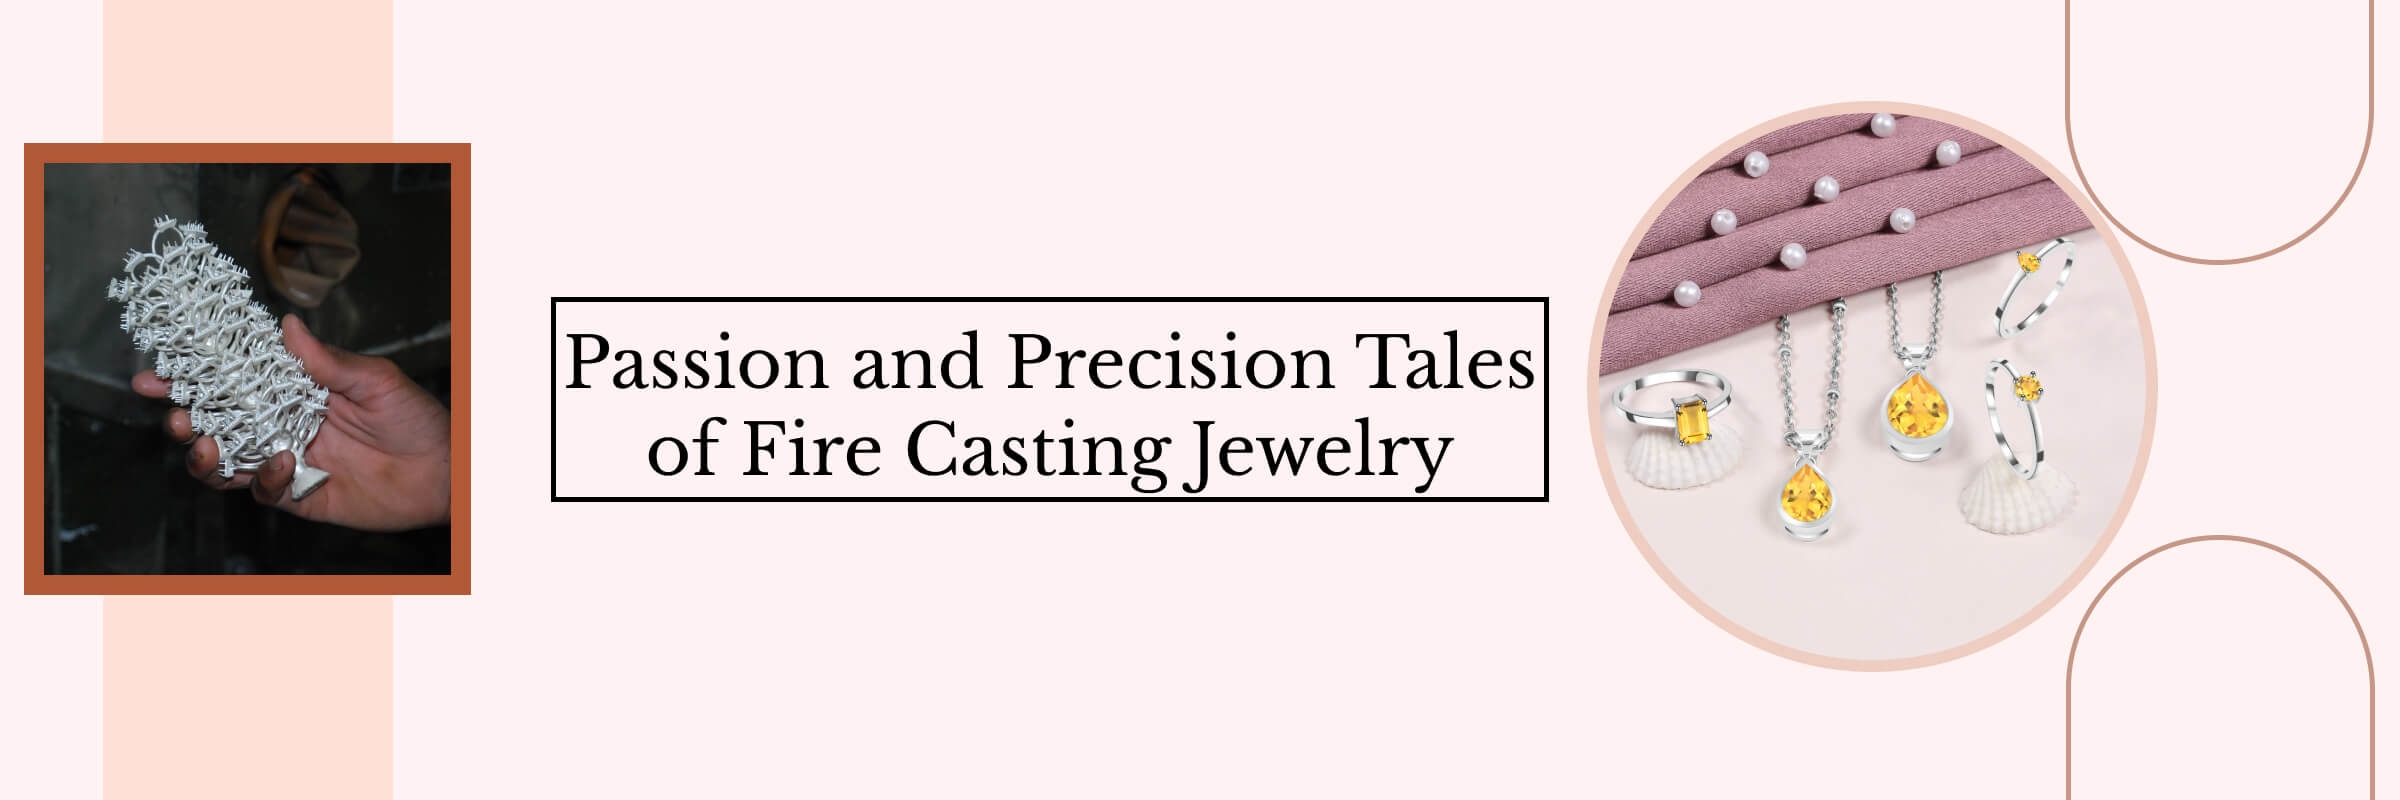 History of Casting Jewelry